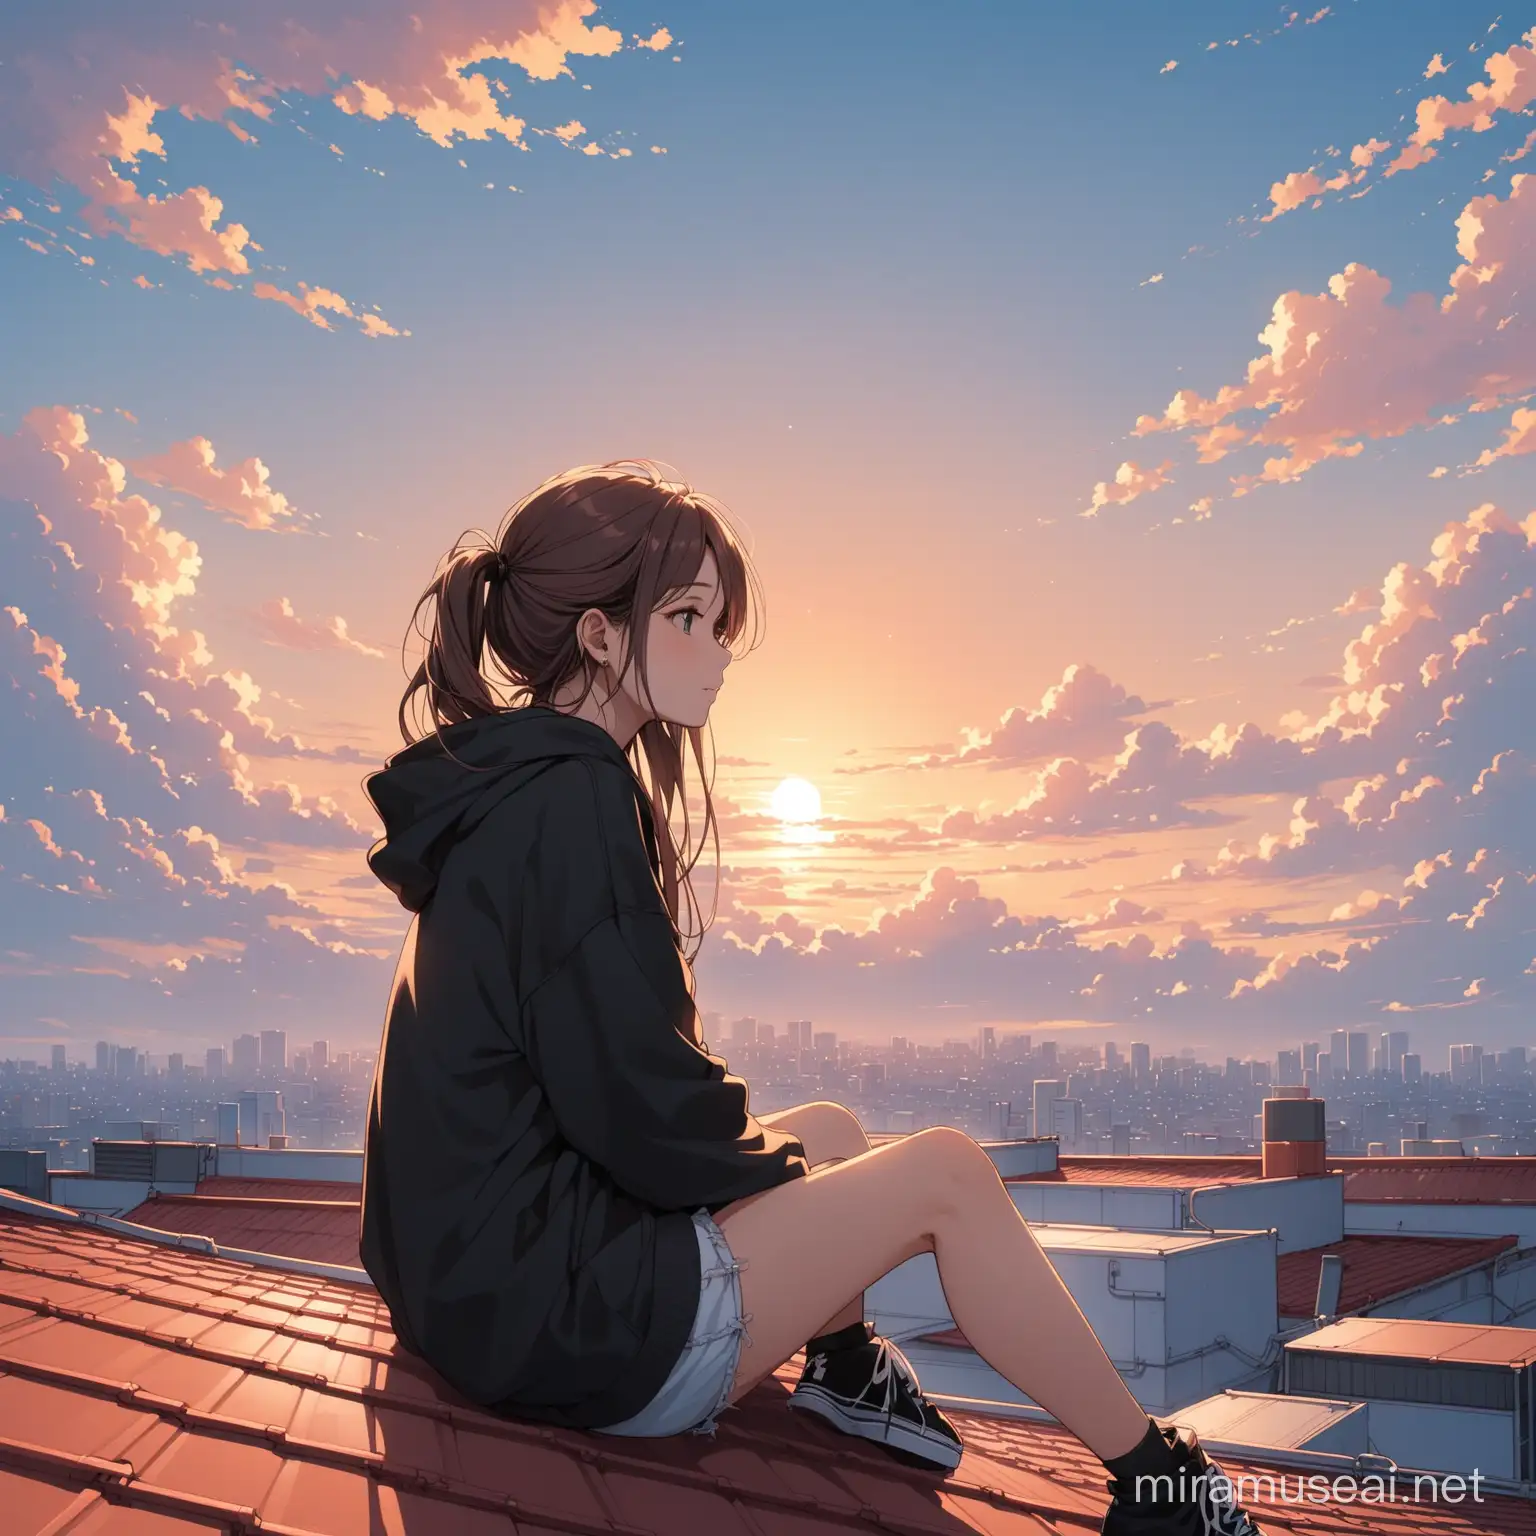 Aesthetic 20 years old girl seating on rooftop thought something, sky is cloudy